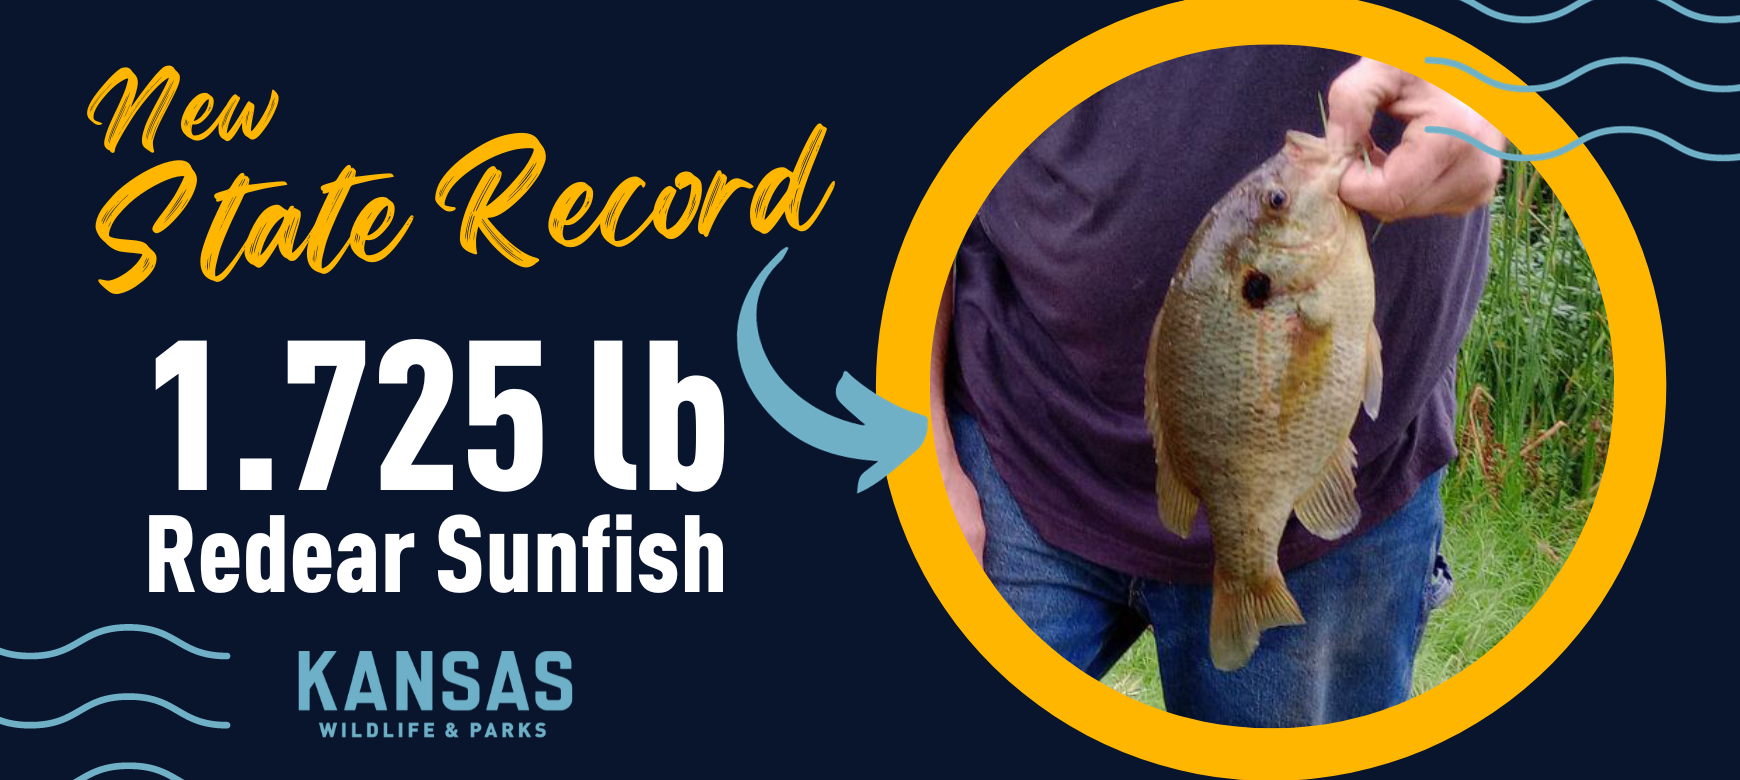 Angler Catches Last State Record Fish for Calendar Year 2023